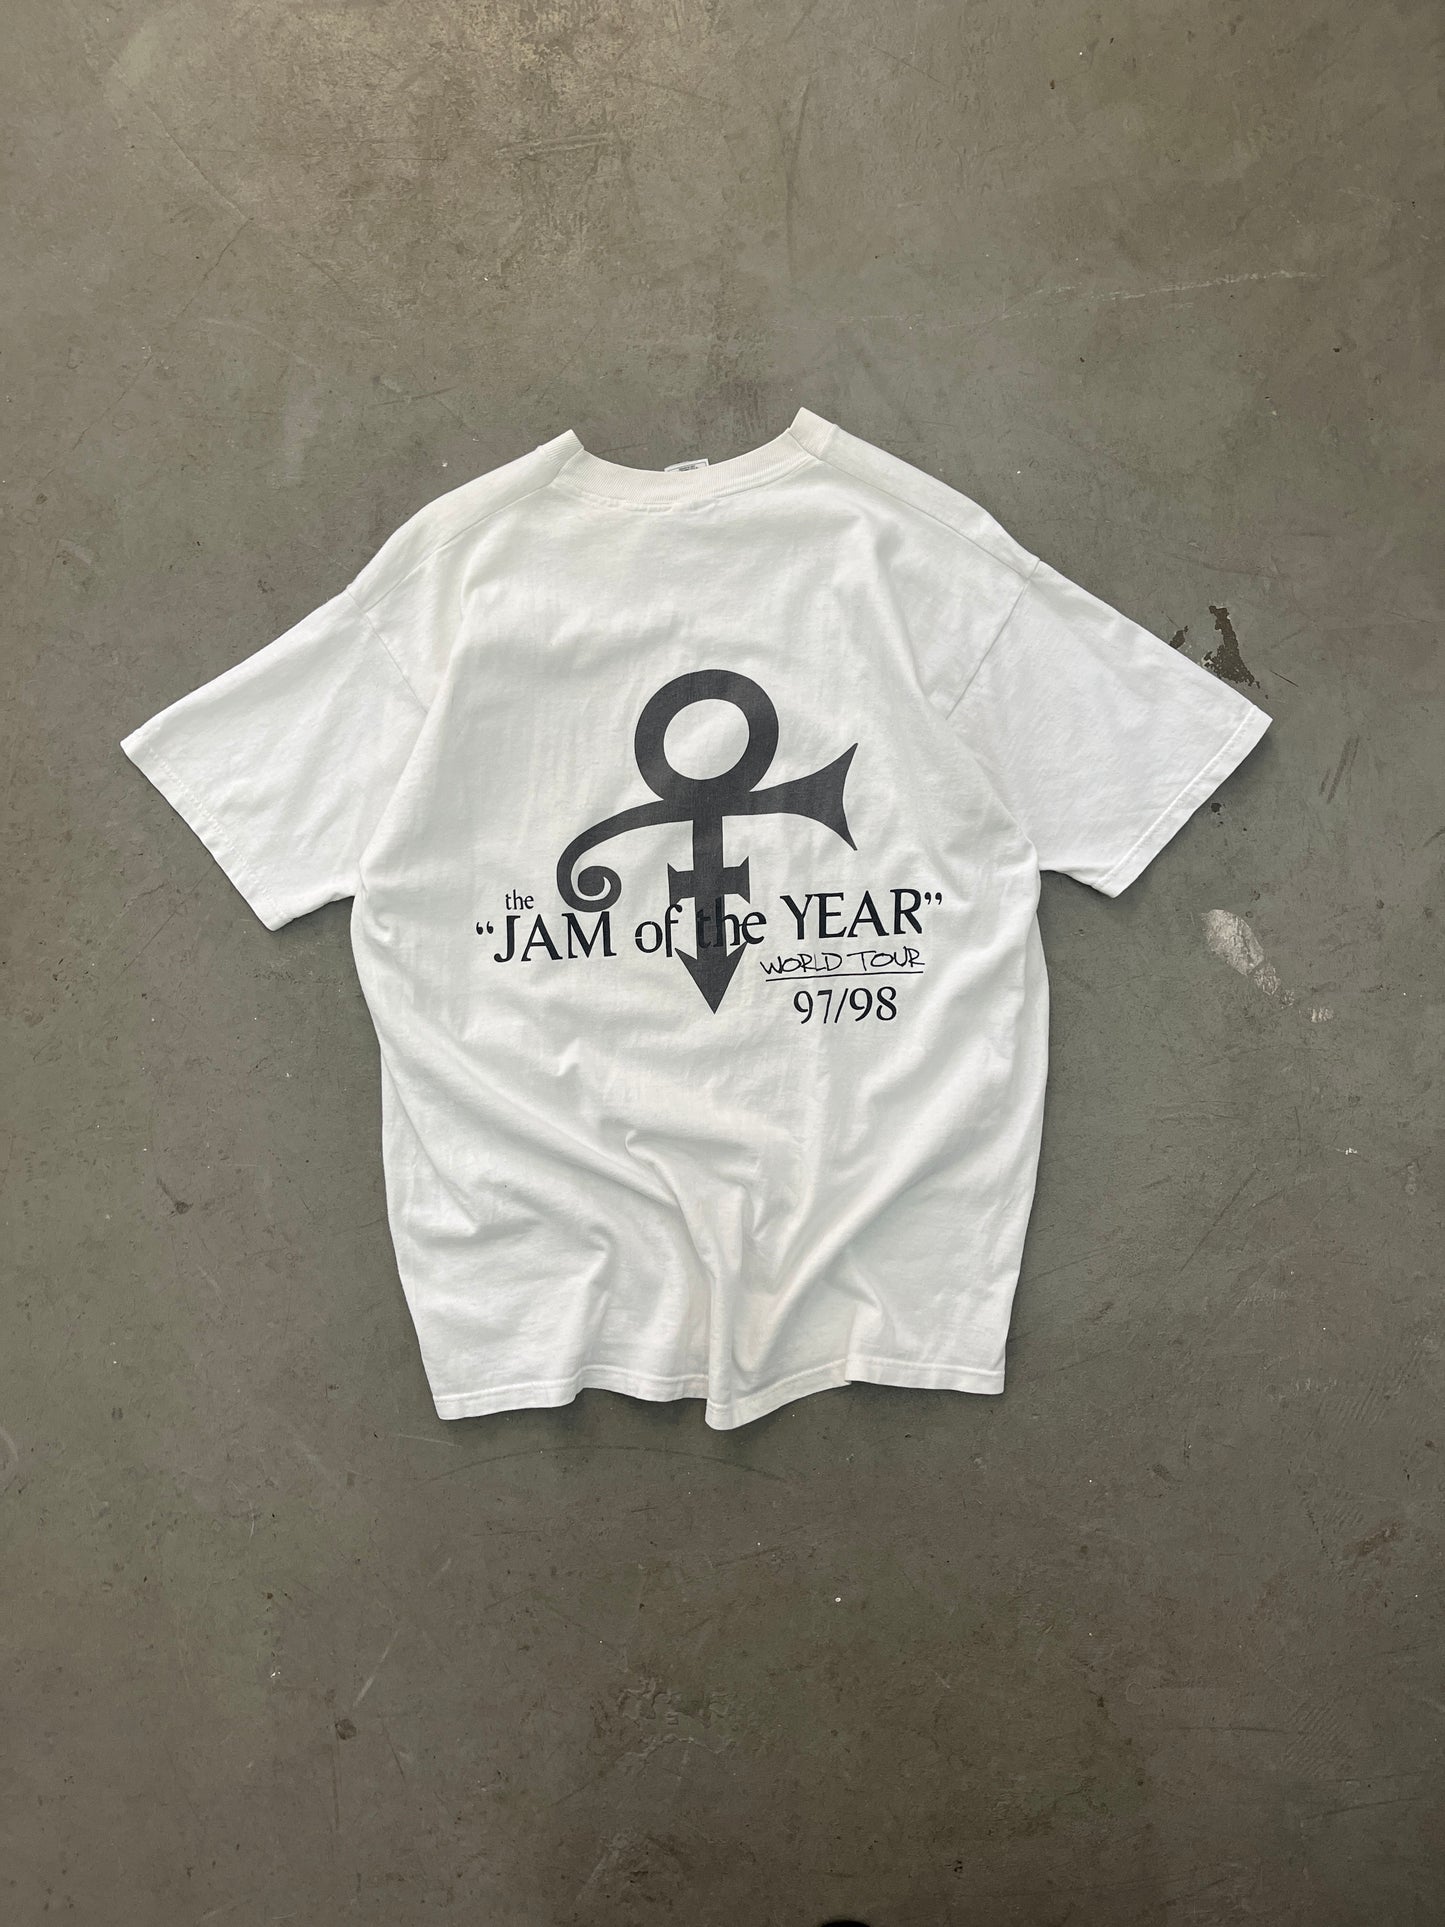 PRINCE JAM OF THE YEAR 97/98 [XL]